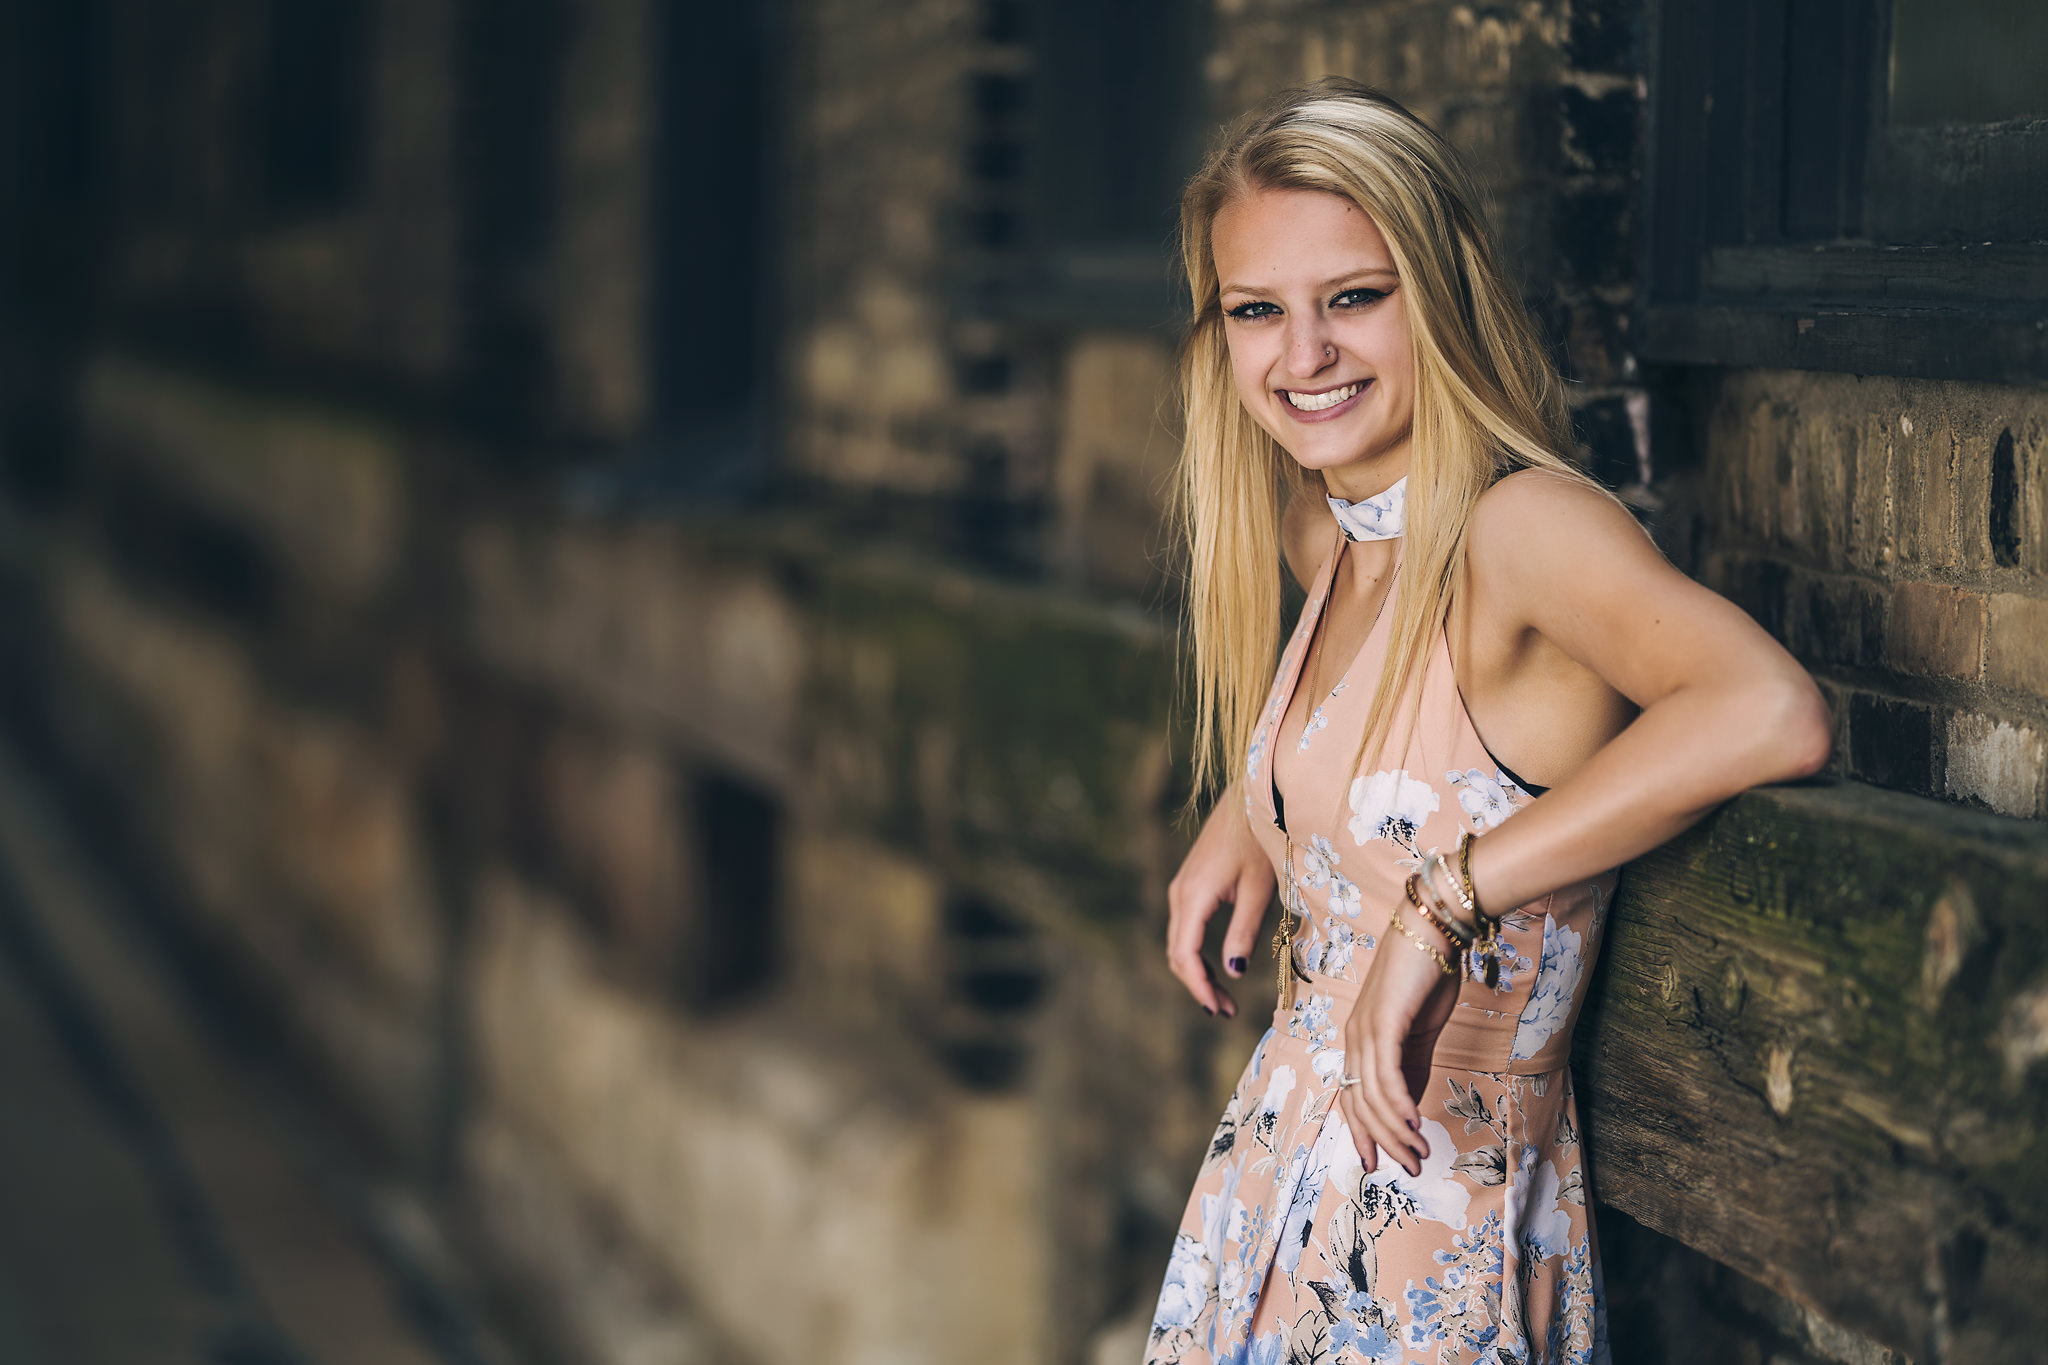 senior pictures muskego high school class of 2018